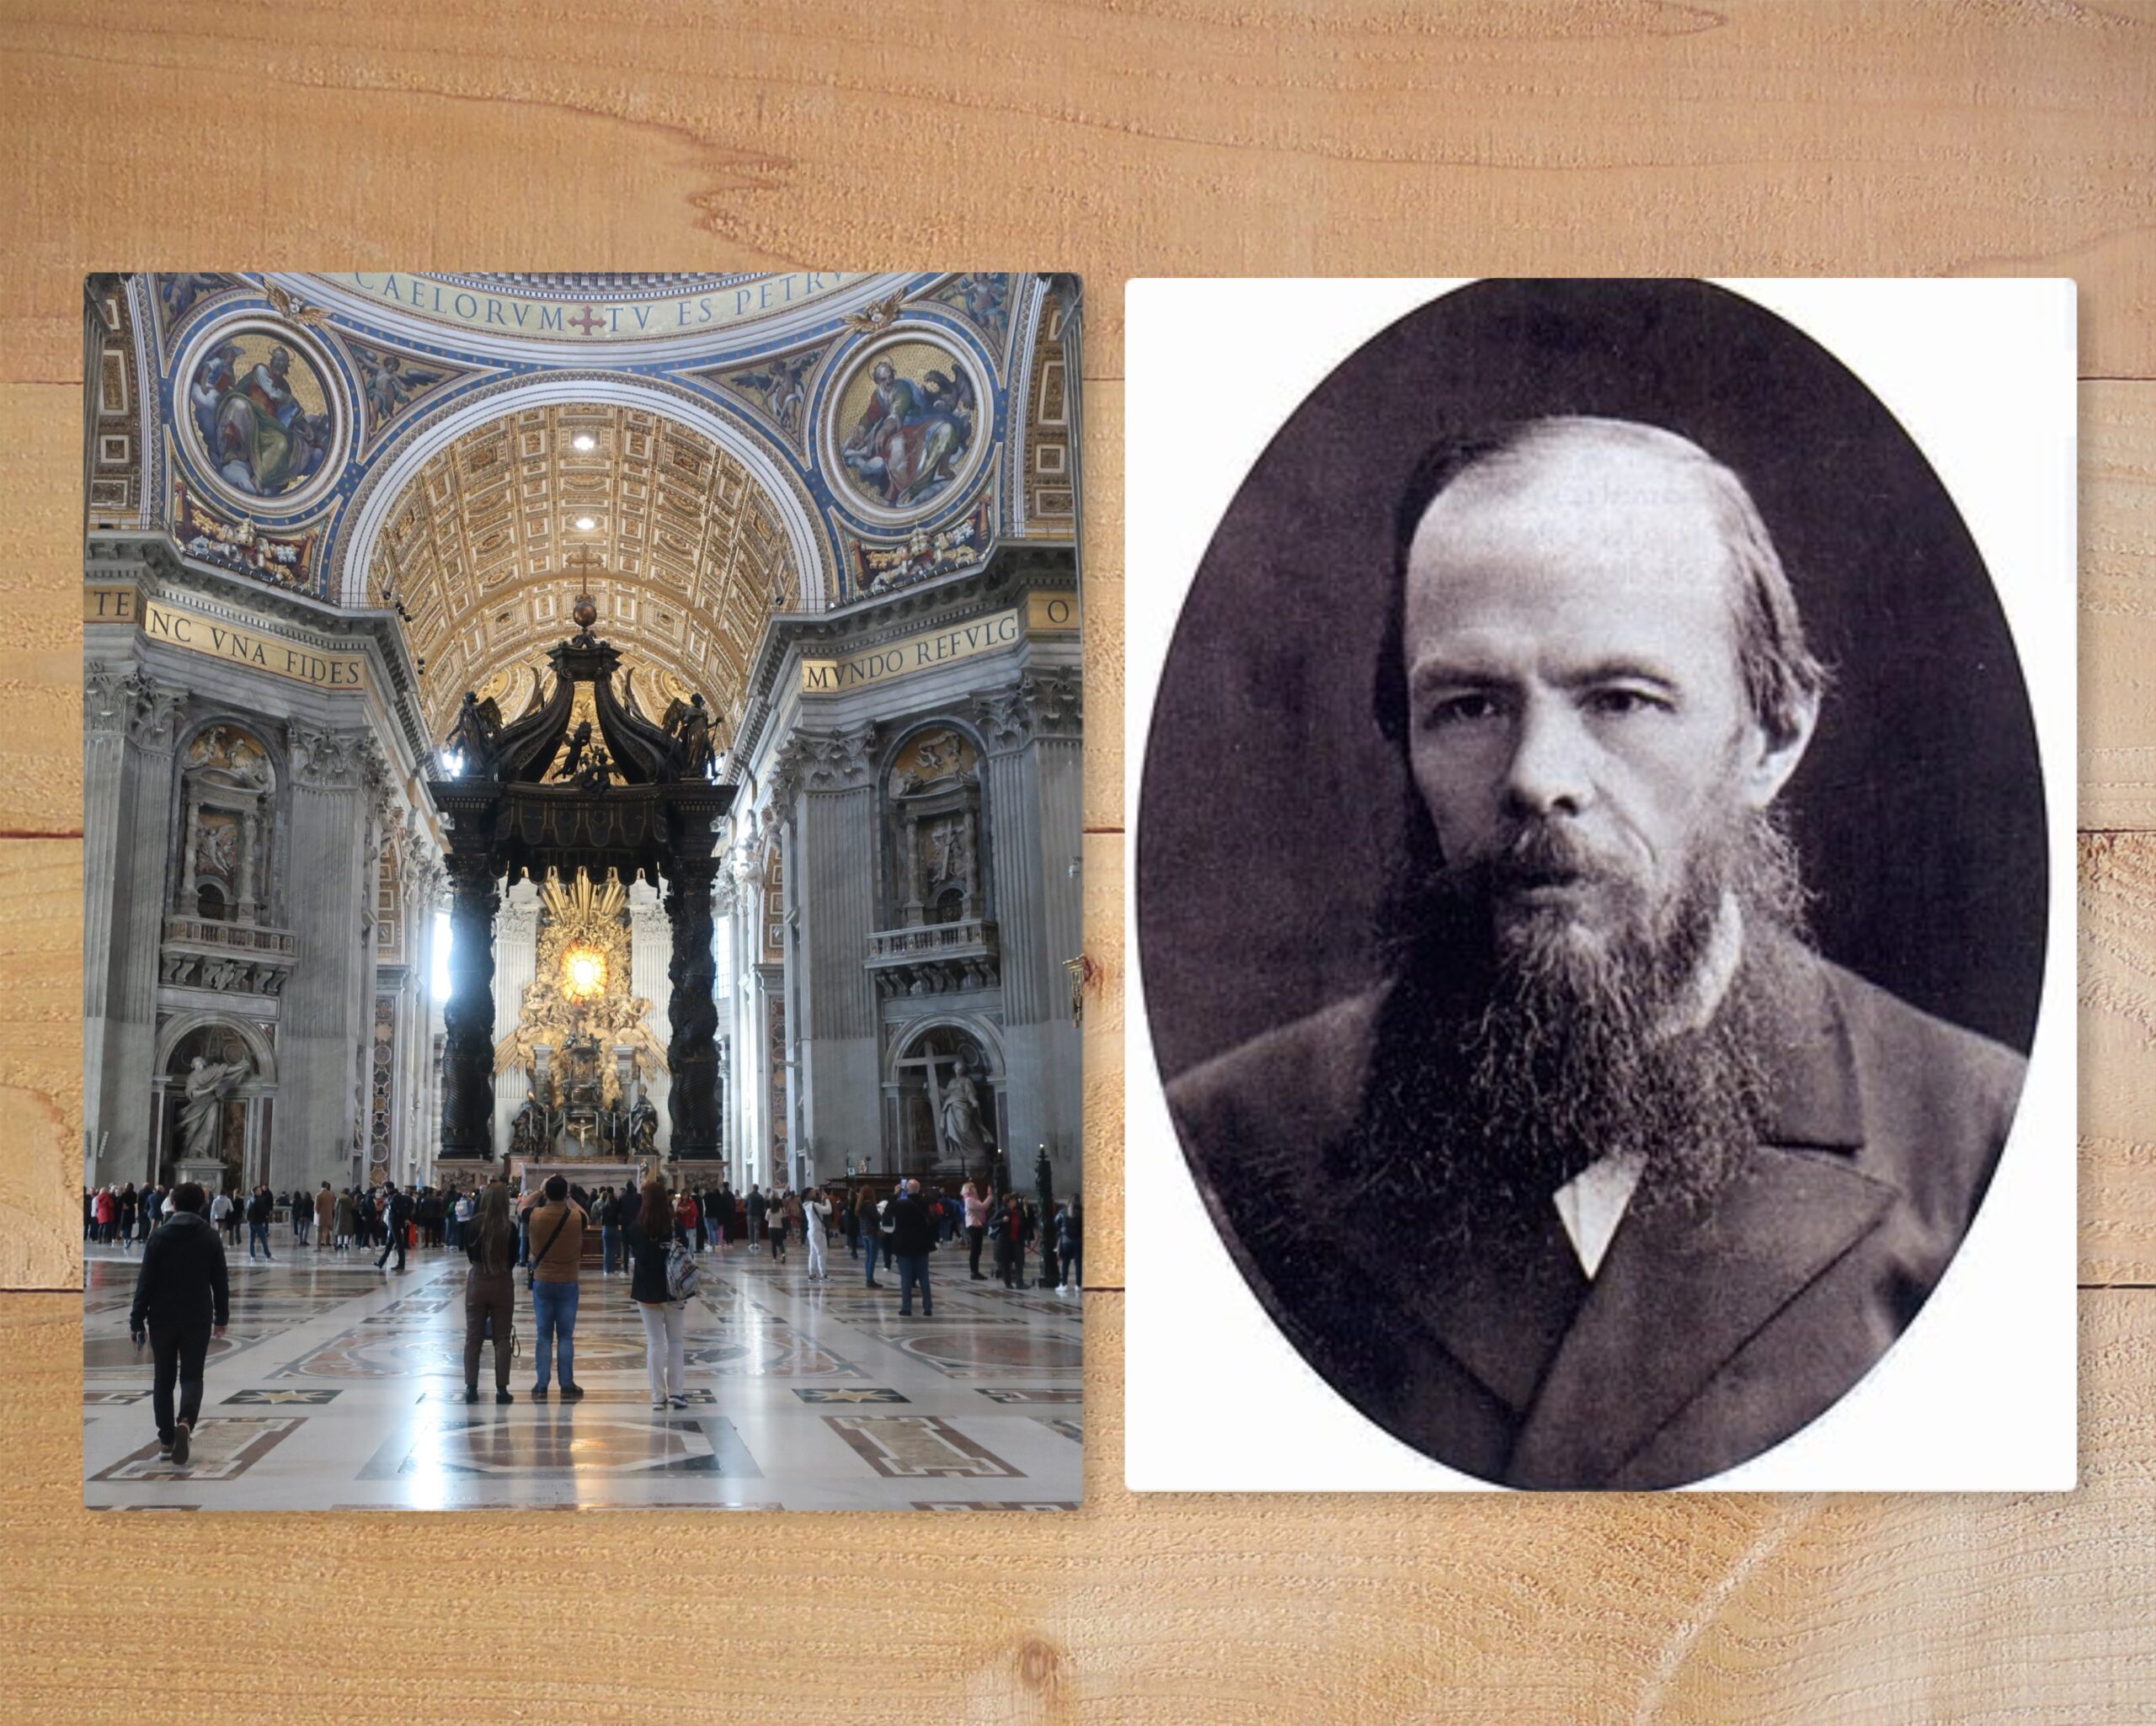 Rome and Dostoevsky